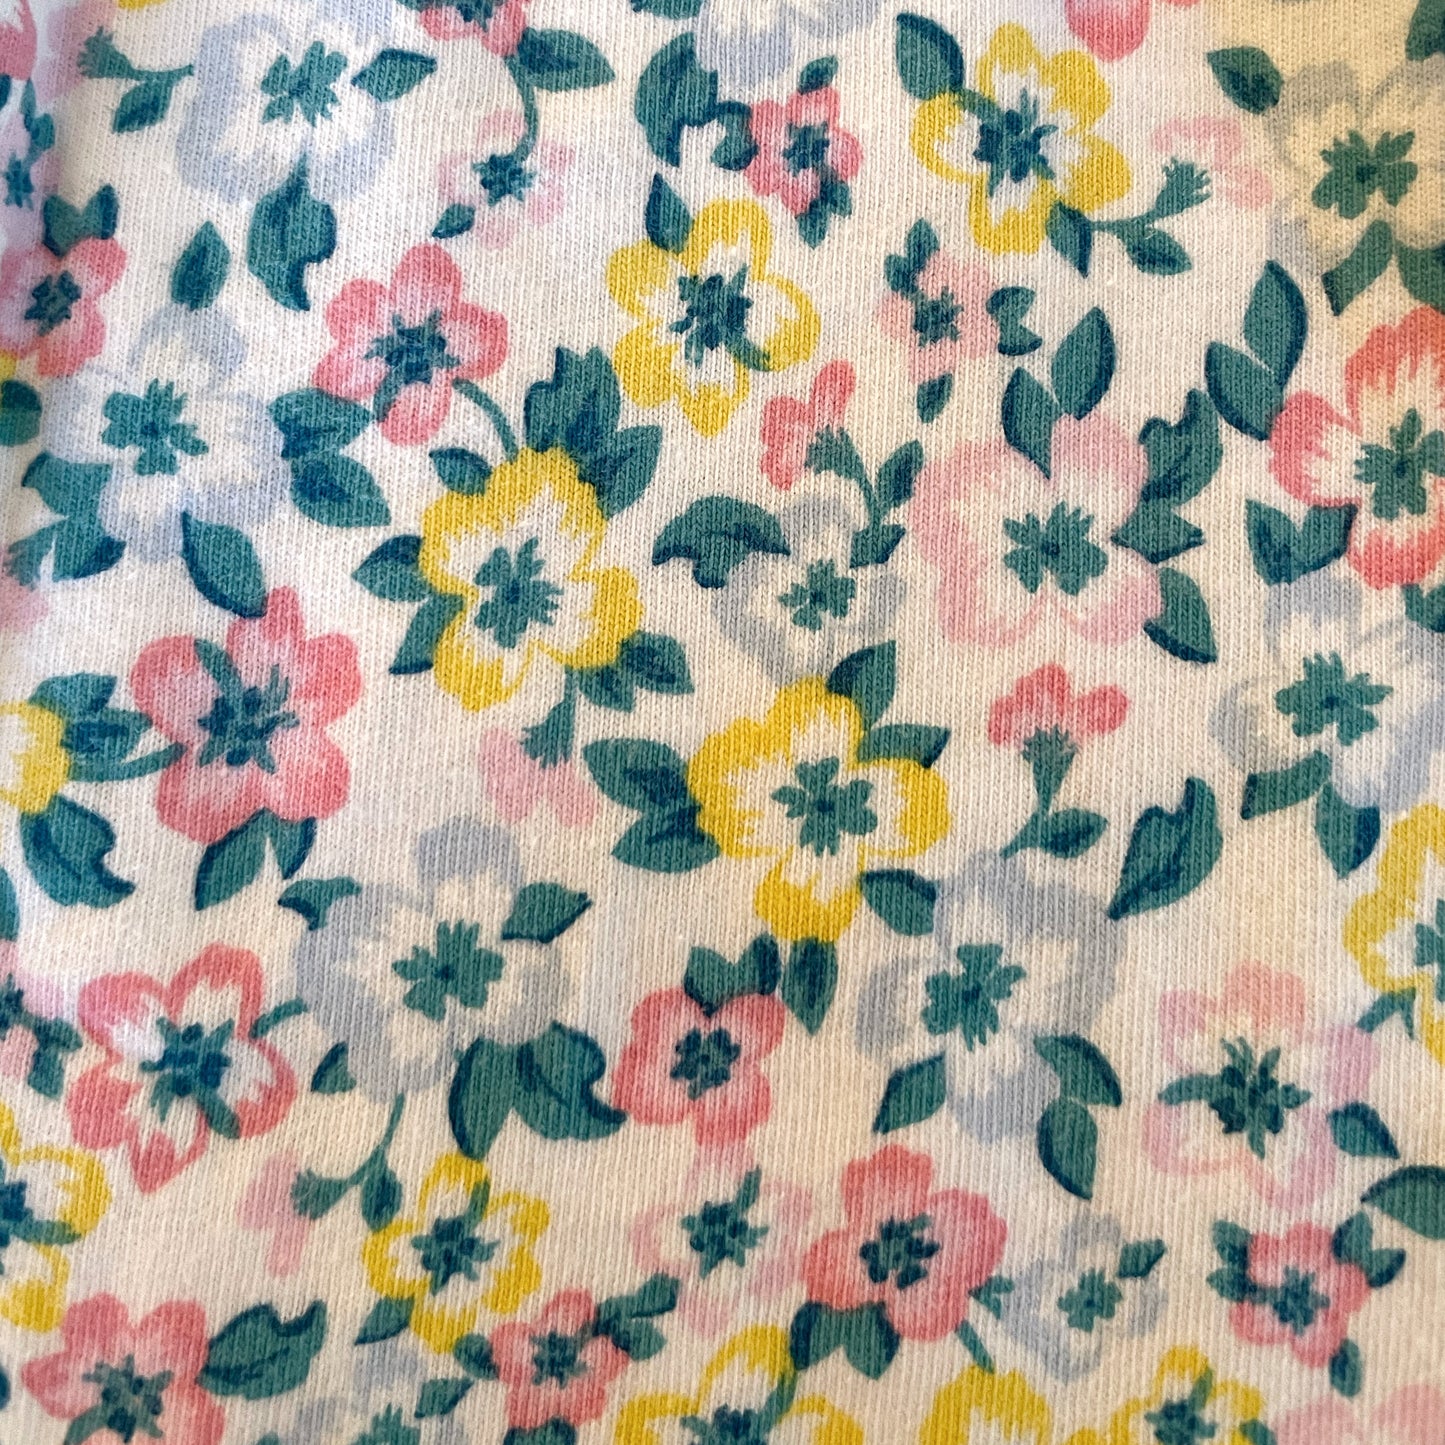 Old Navy Floral Sundress - 6-12 mo.